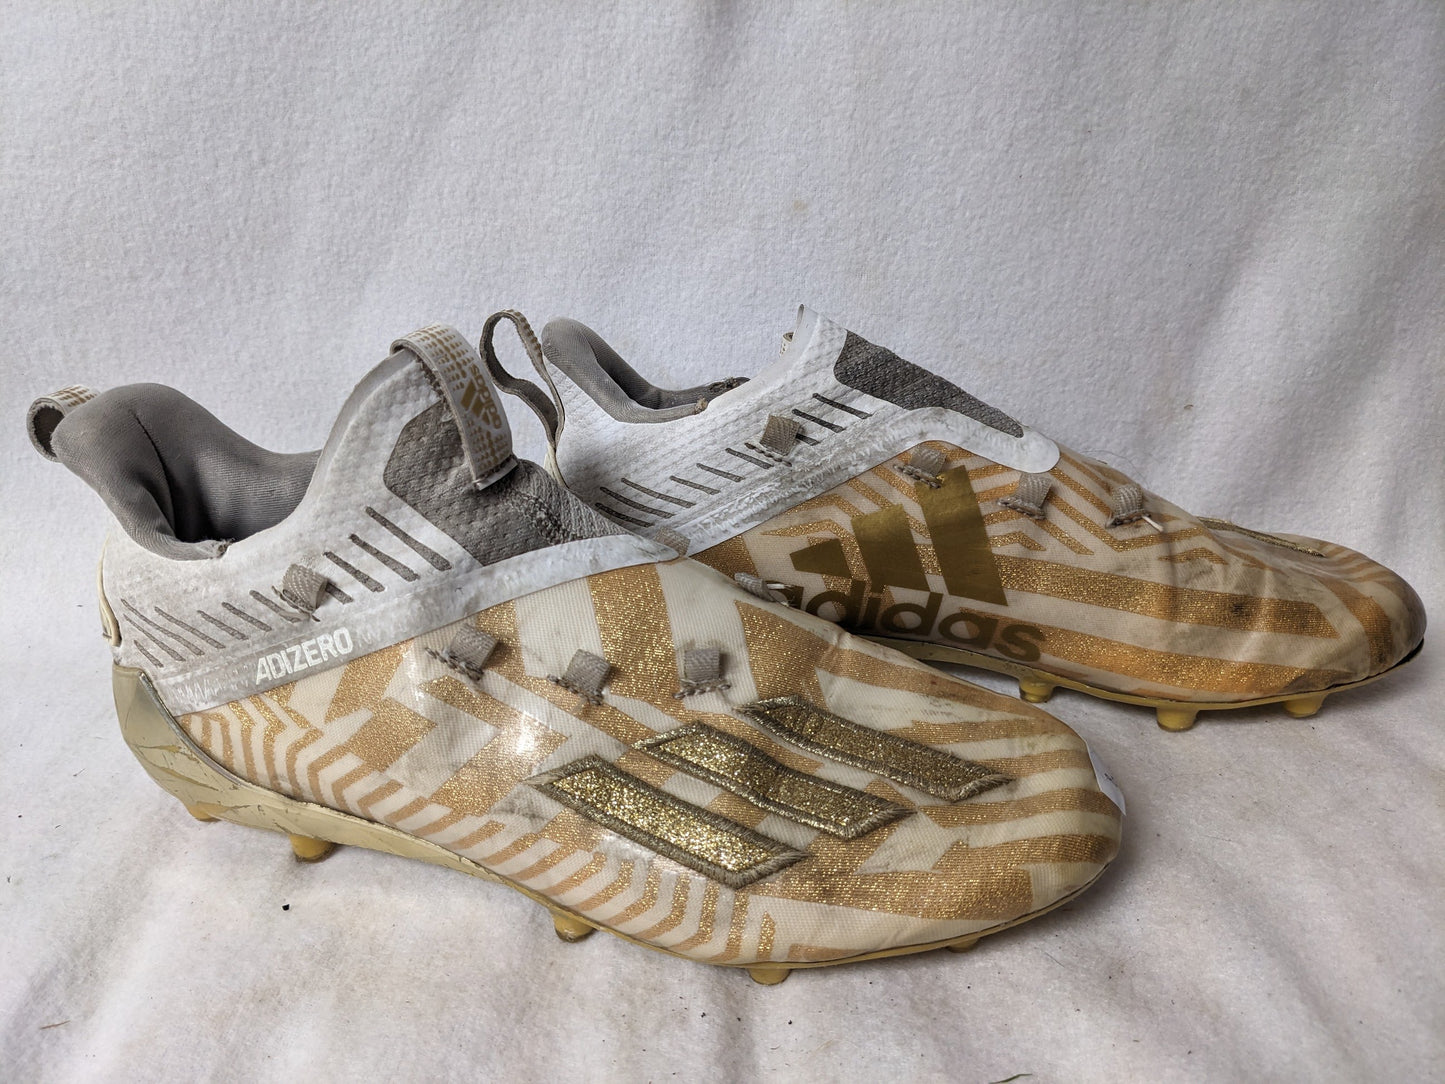 Adidas Adizero Cleats Size 8 Color Yellow Condition Used